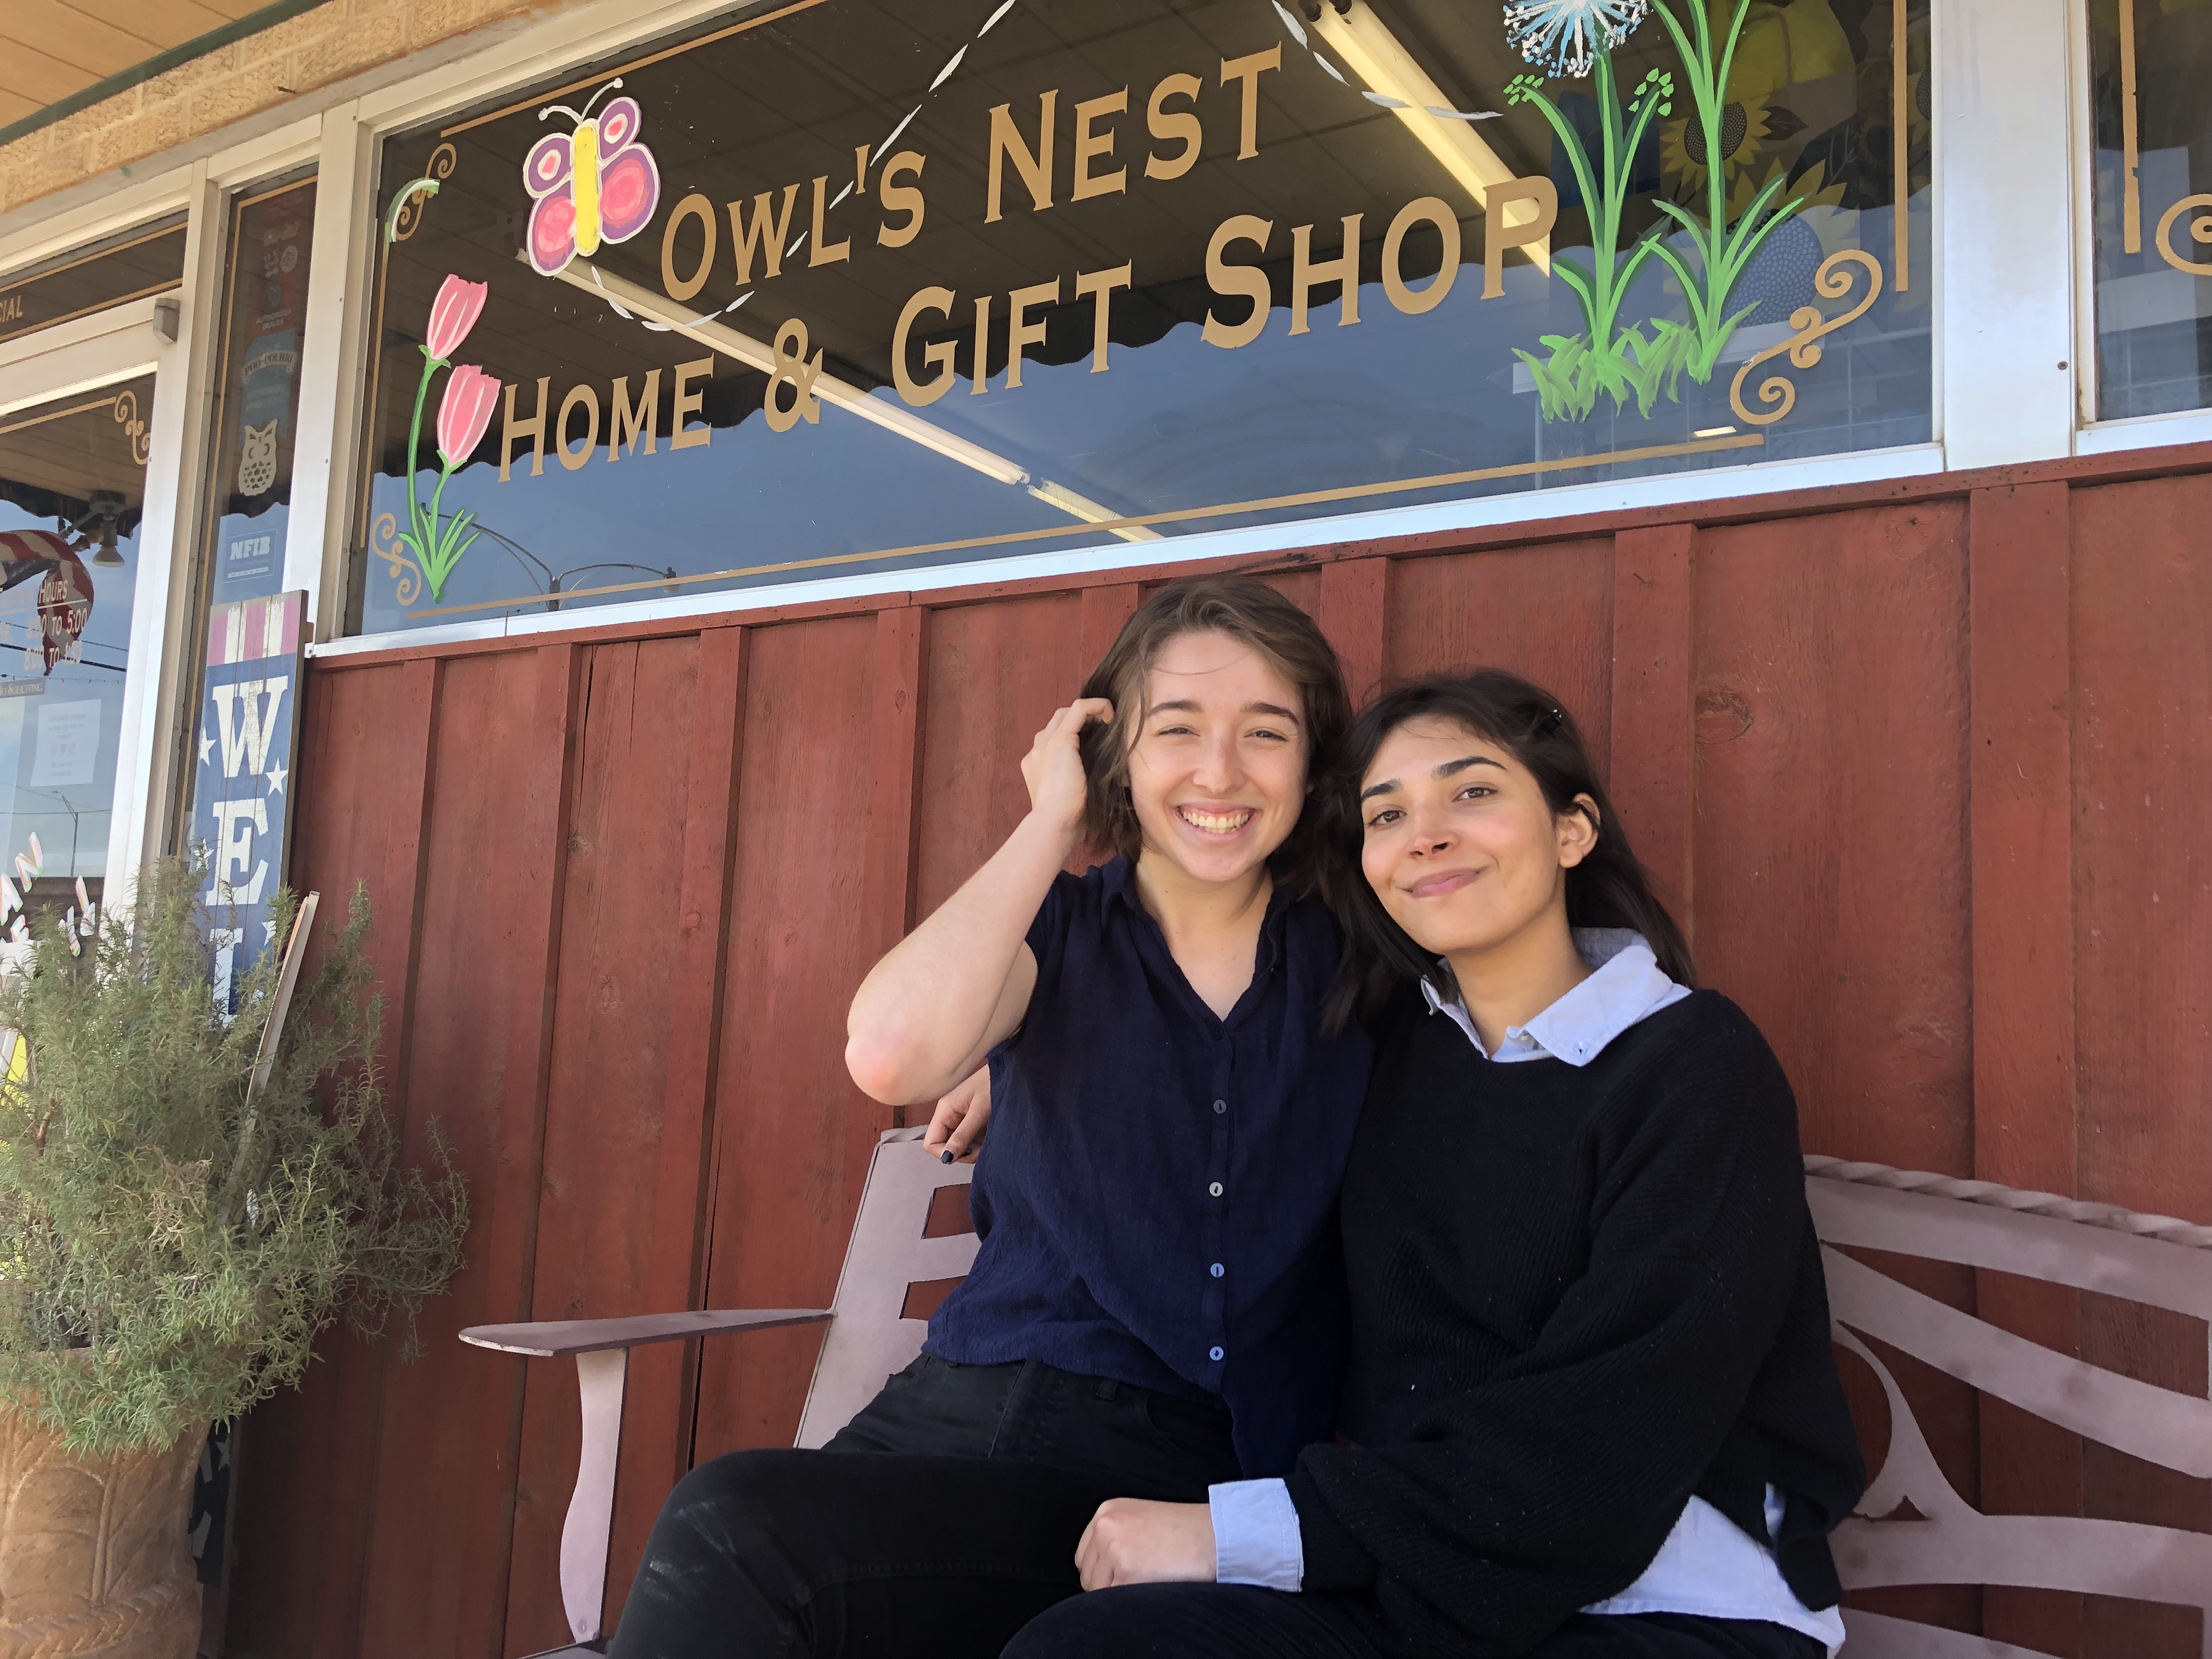 Tinu and Haley sit on a bench in front of a storefront